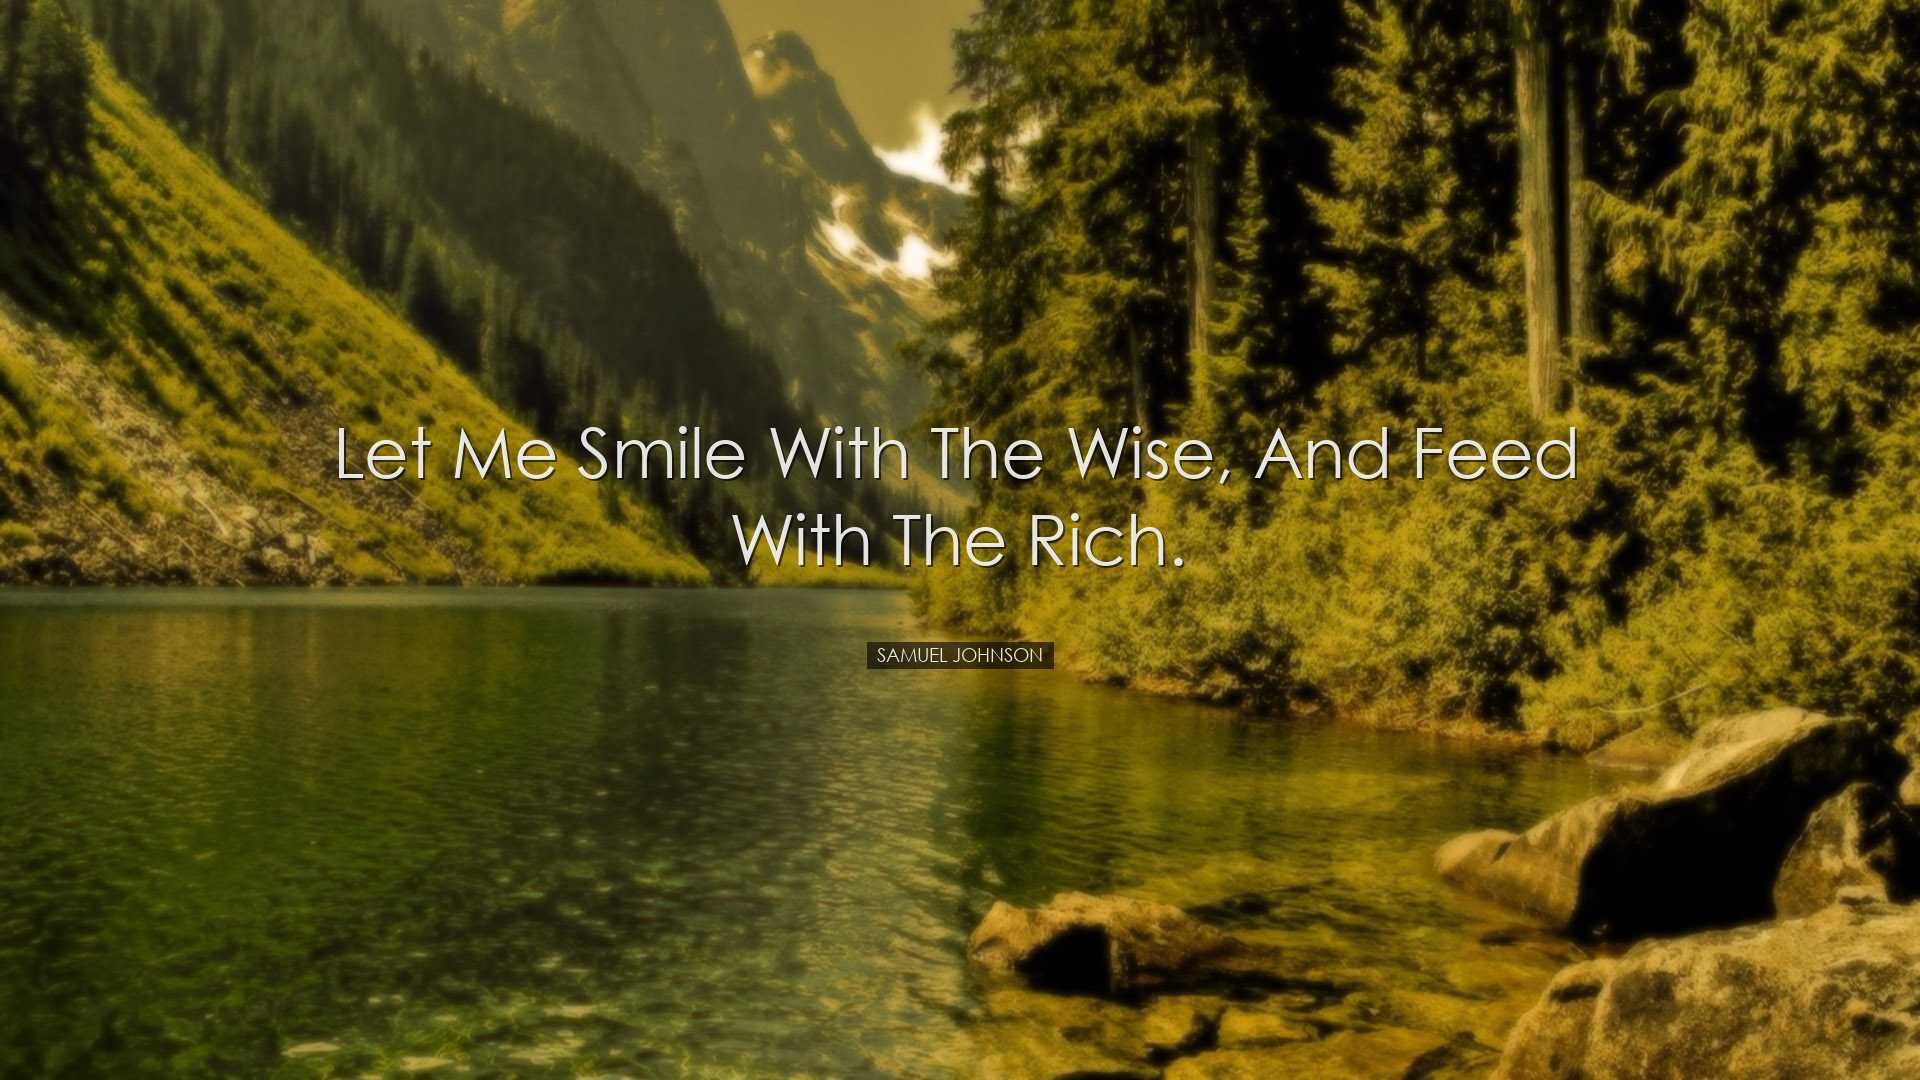 Let me smile with the wise, and feed with the rich. - Samuel Johns